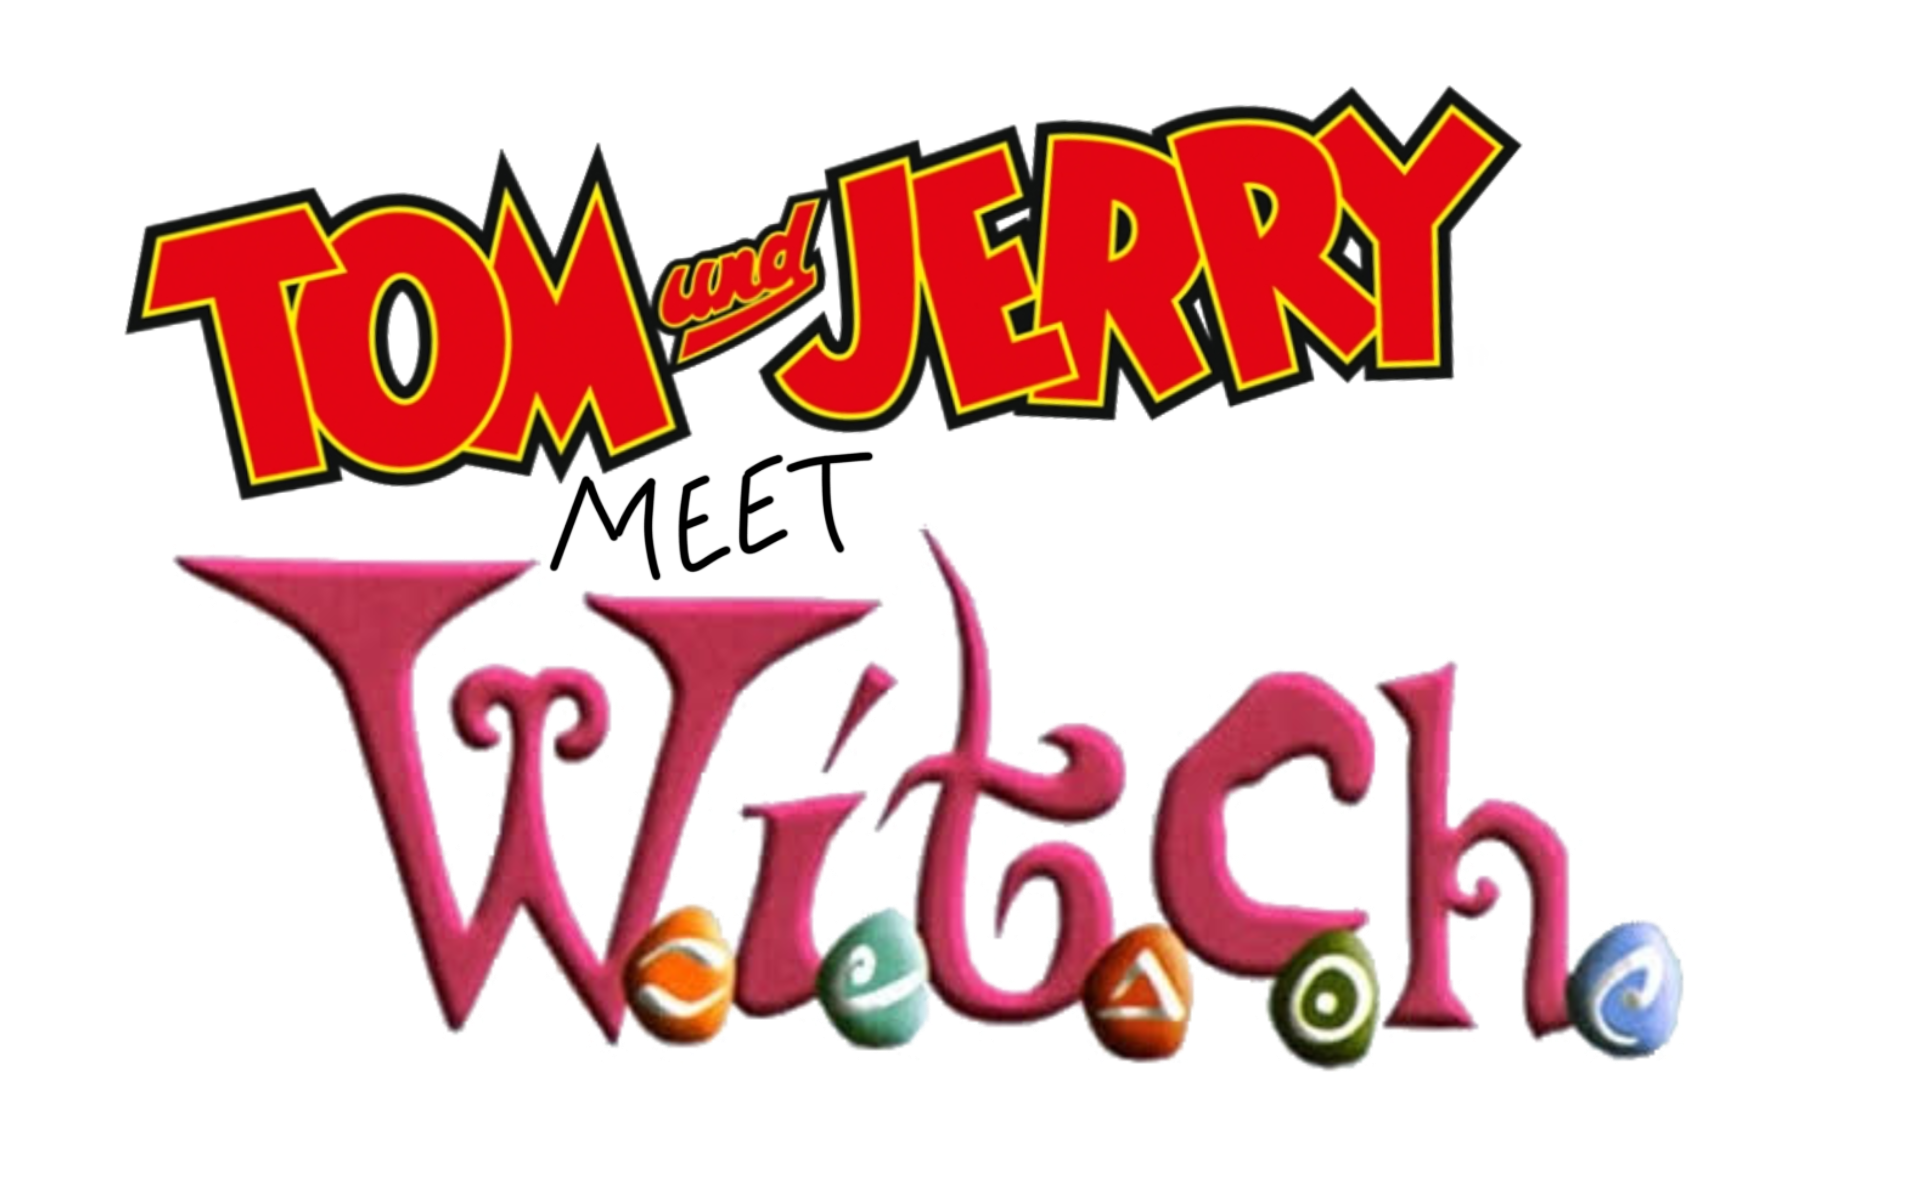 File:Tom and Jerry logo.svg - Wikipedia